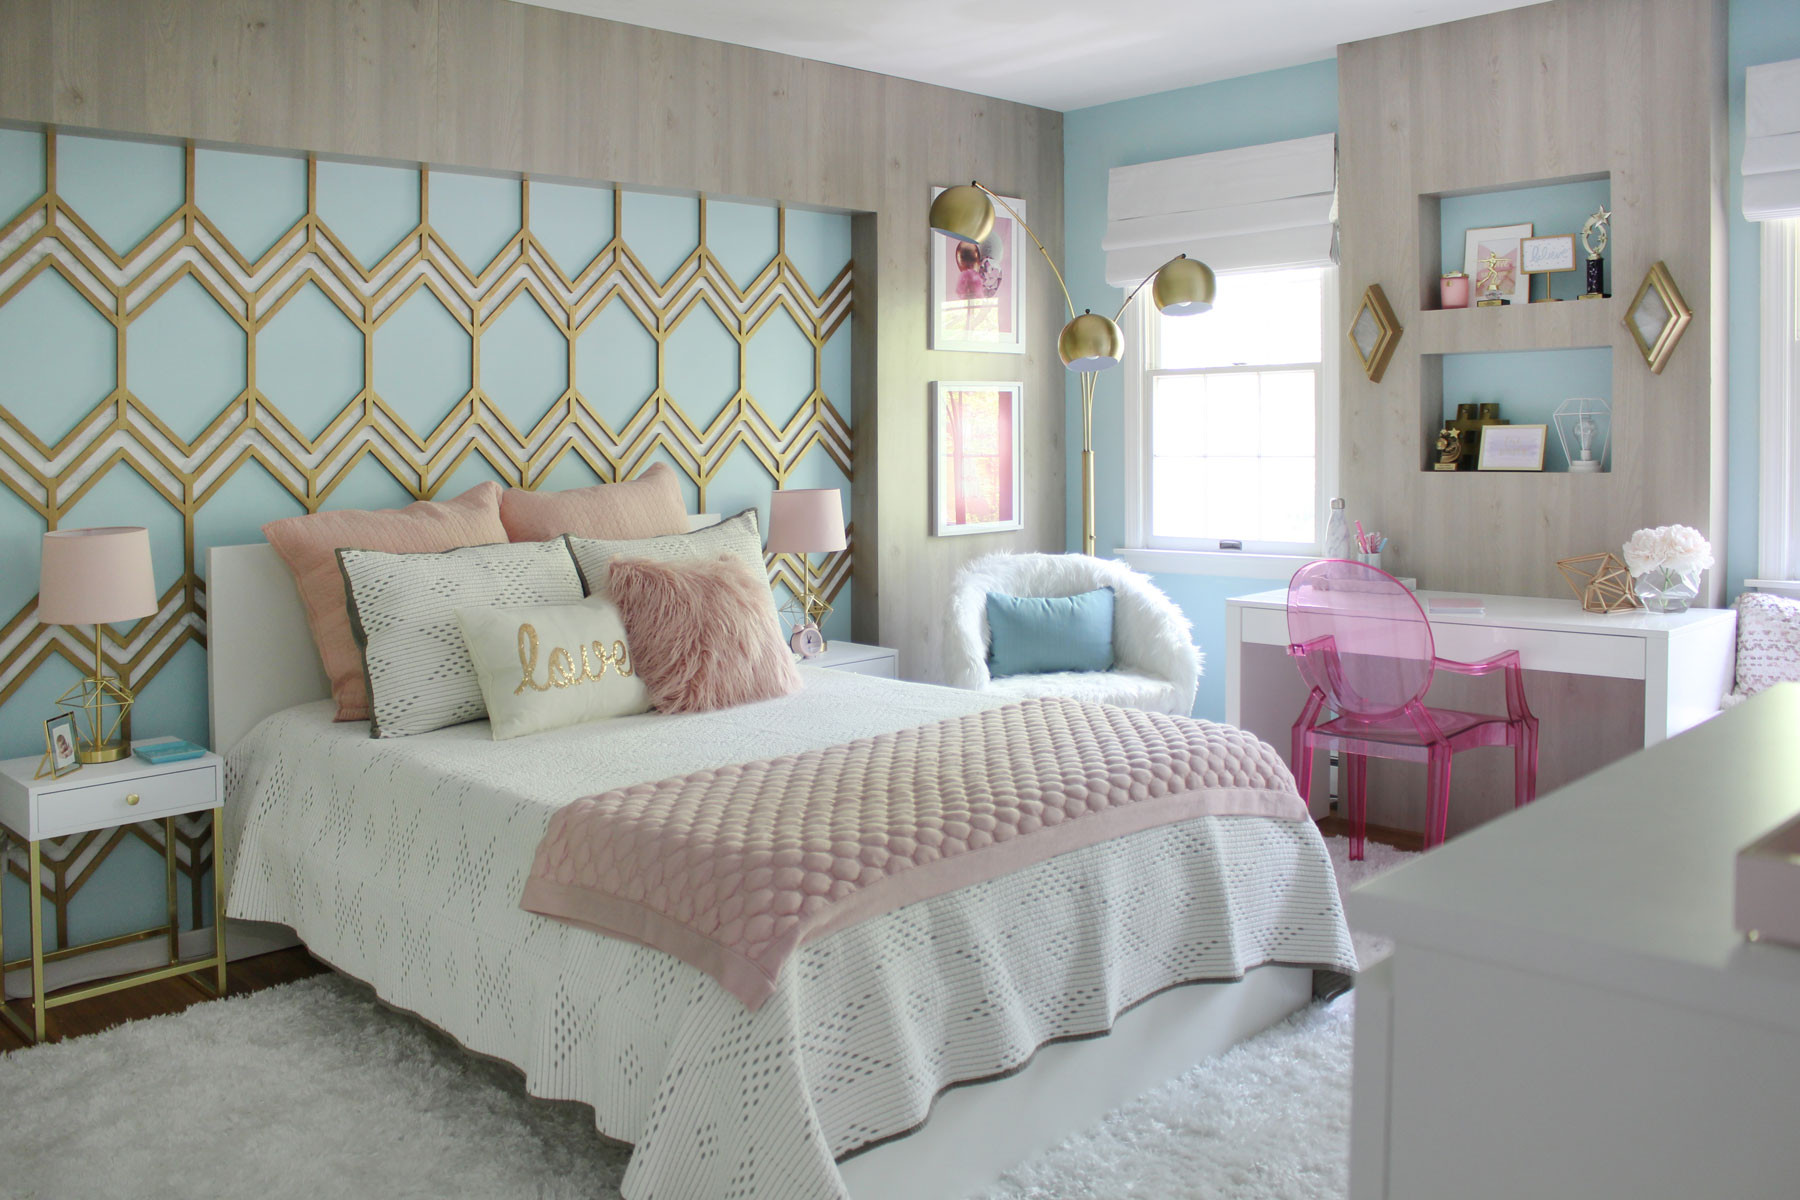 Kids Dream Room
 This New Design Show Will Inspire Your Kids to Dream Big